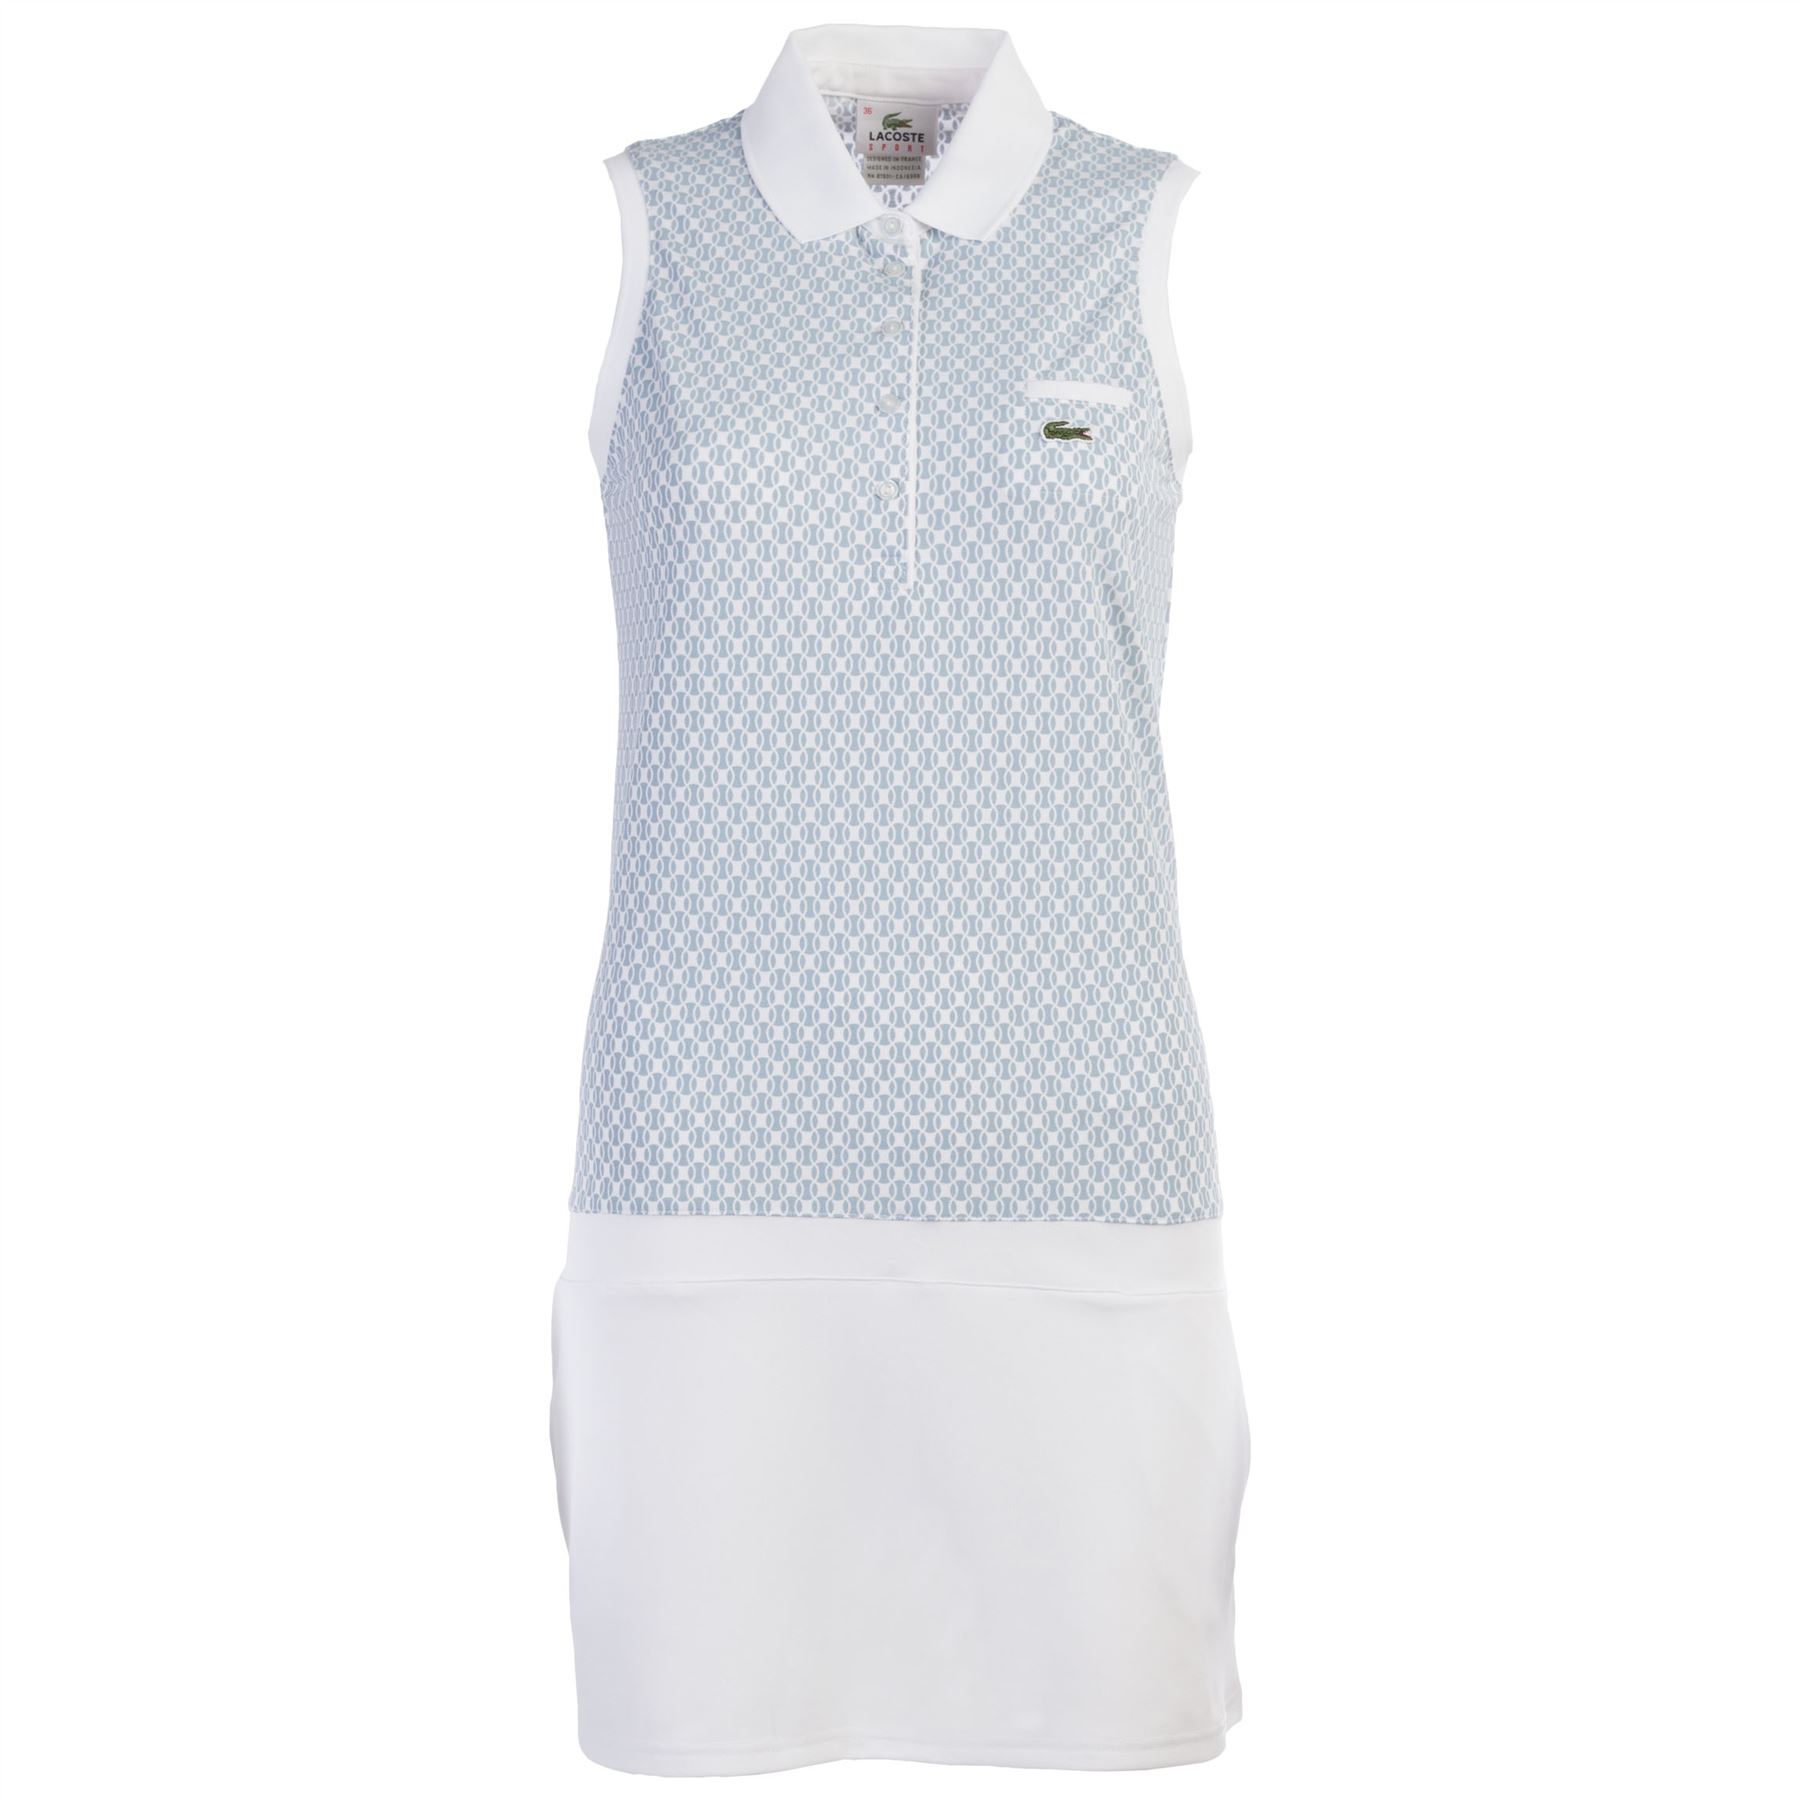 Lacoste Women's Sleeveless Polo Dress Running Gym Active Sports ...